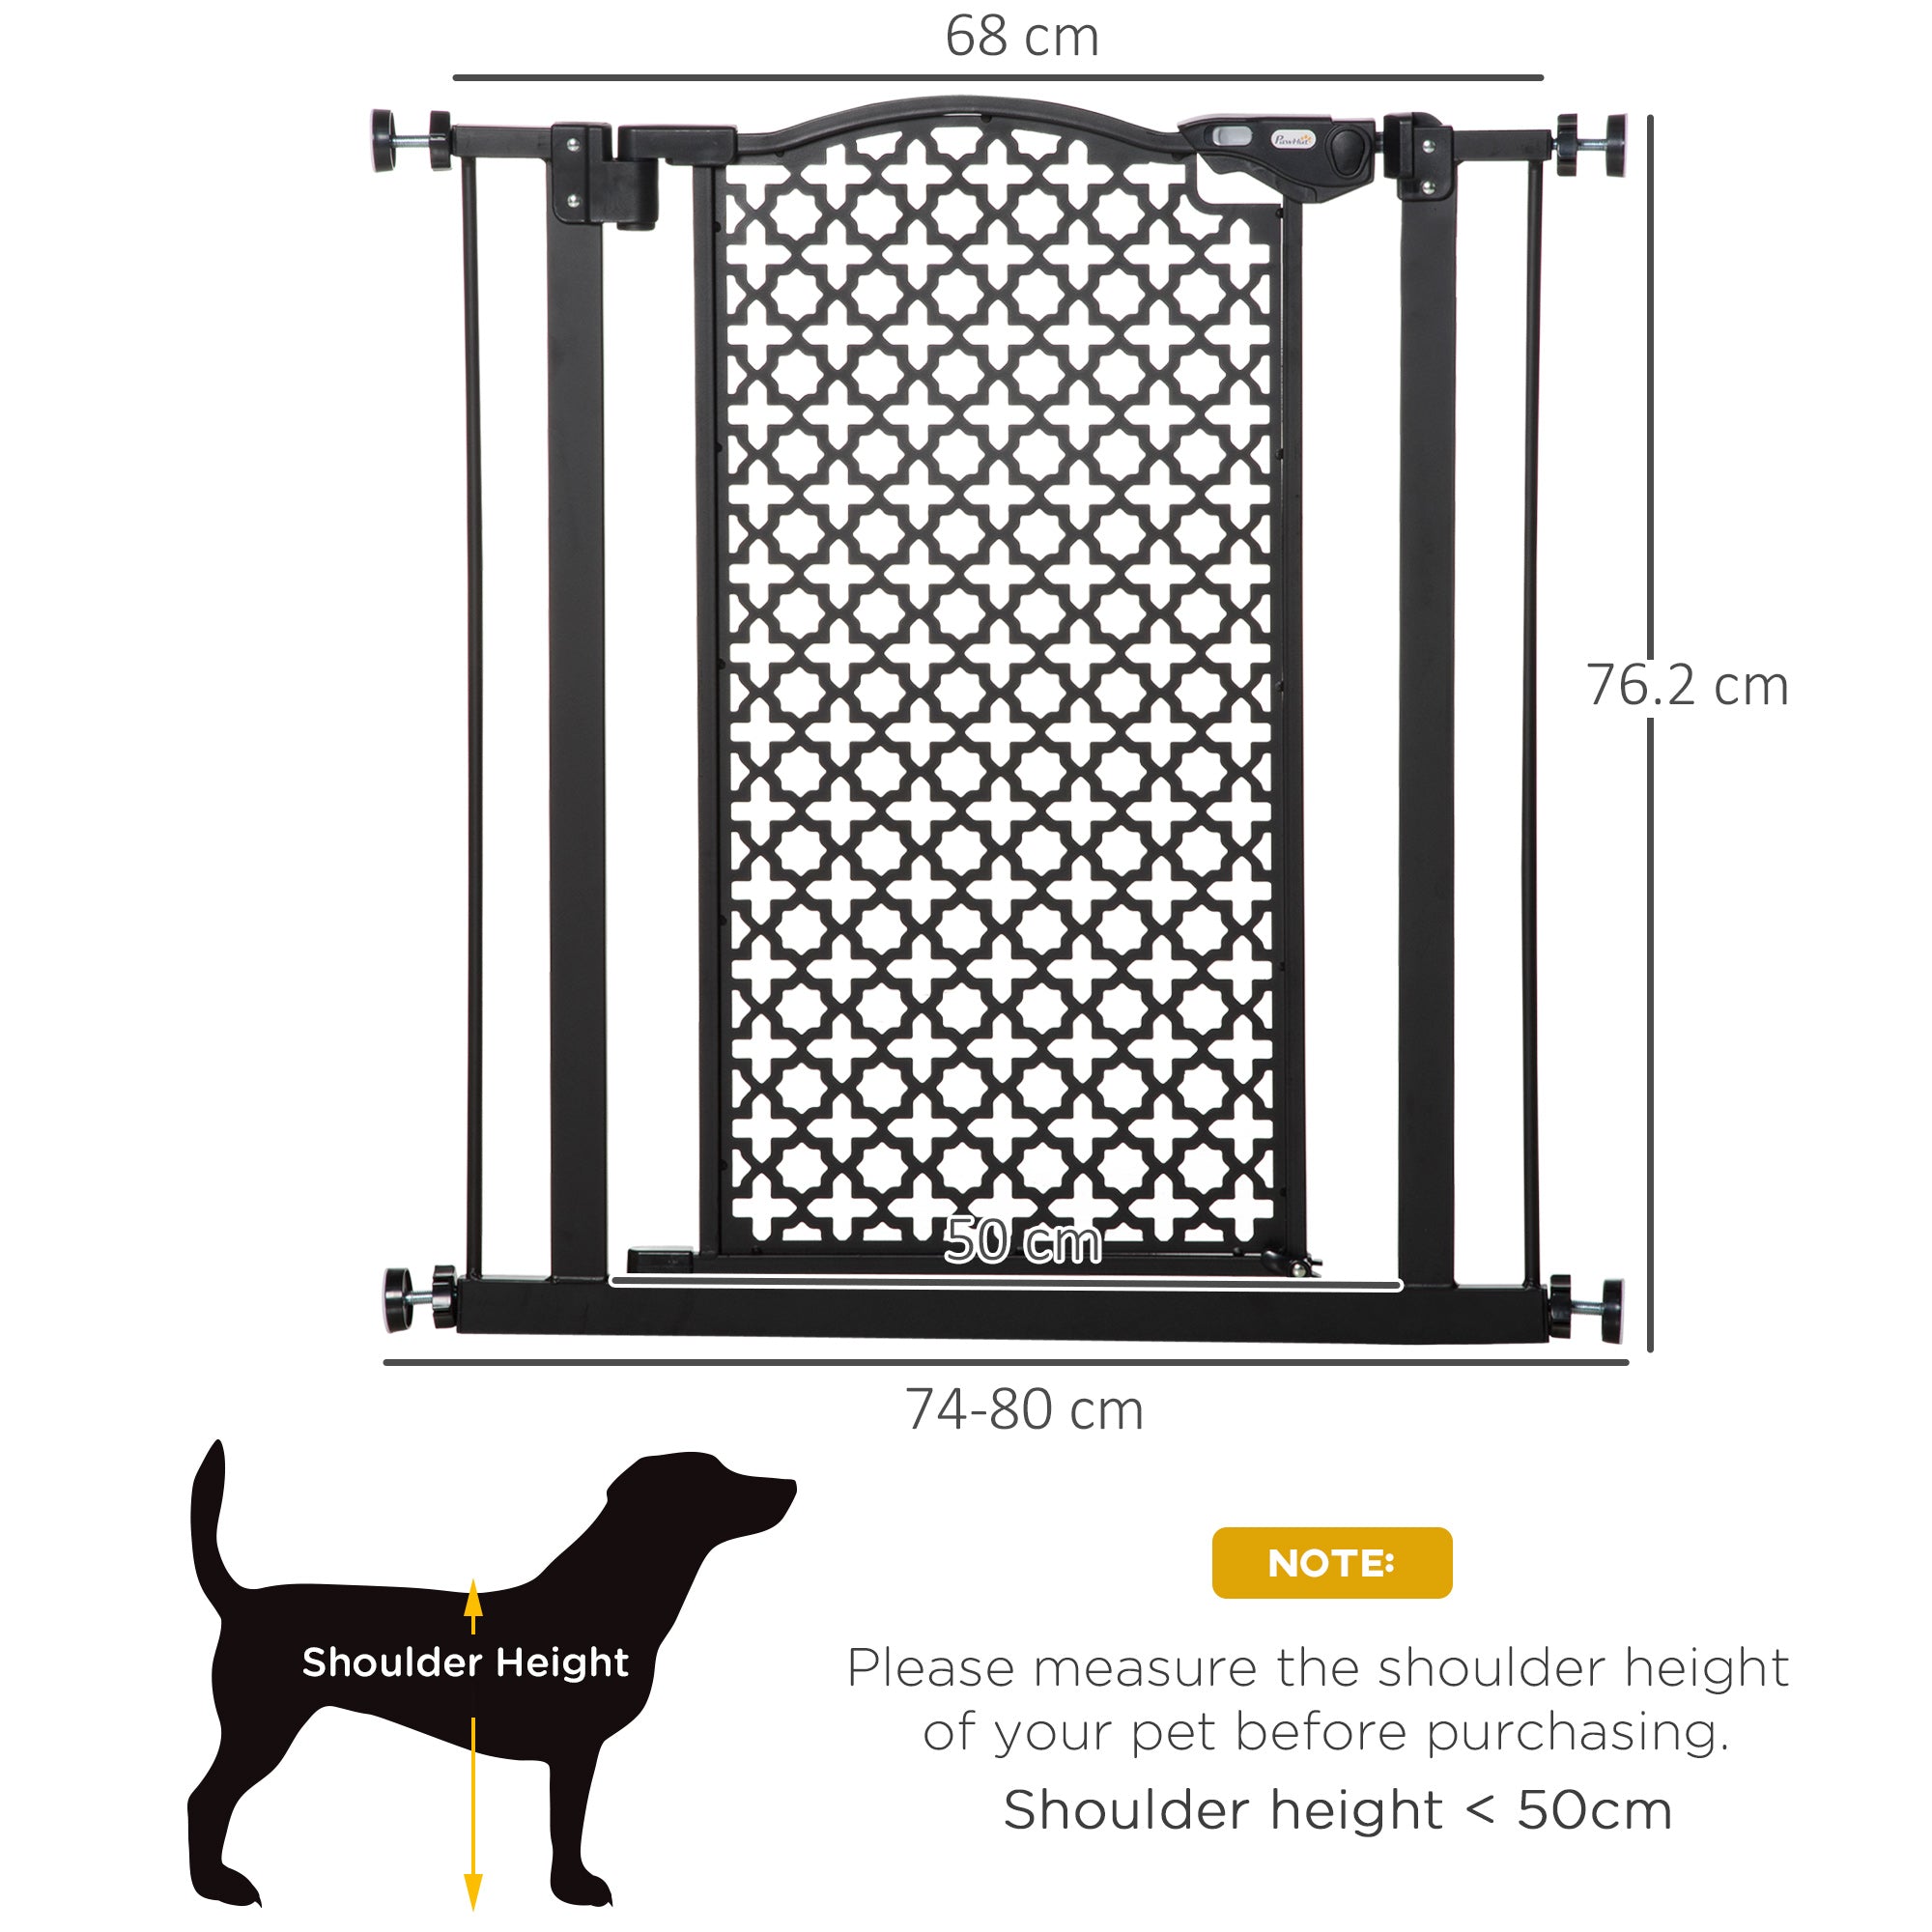 74-80 cm Pet Safety Gate Barrier Stair Pressure Fit with Auto Close and Double Locking for Doorways, Hallways, Black-2